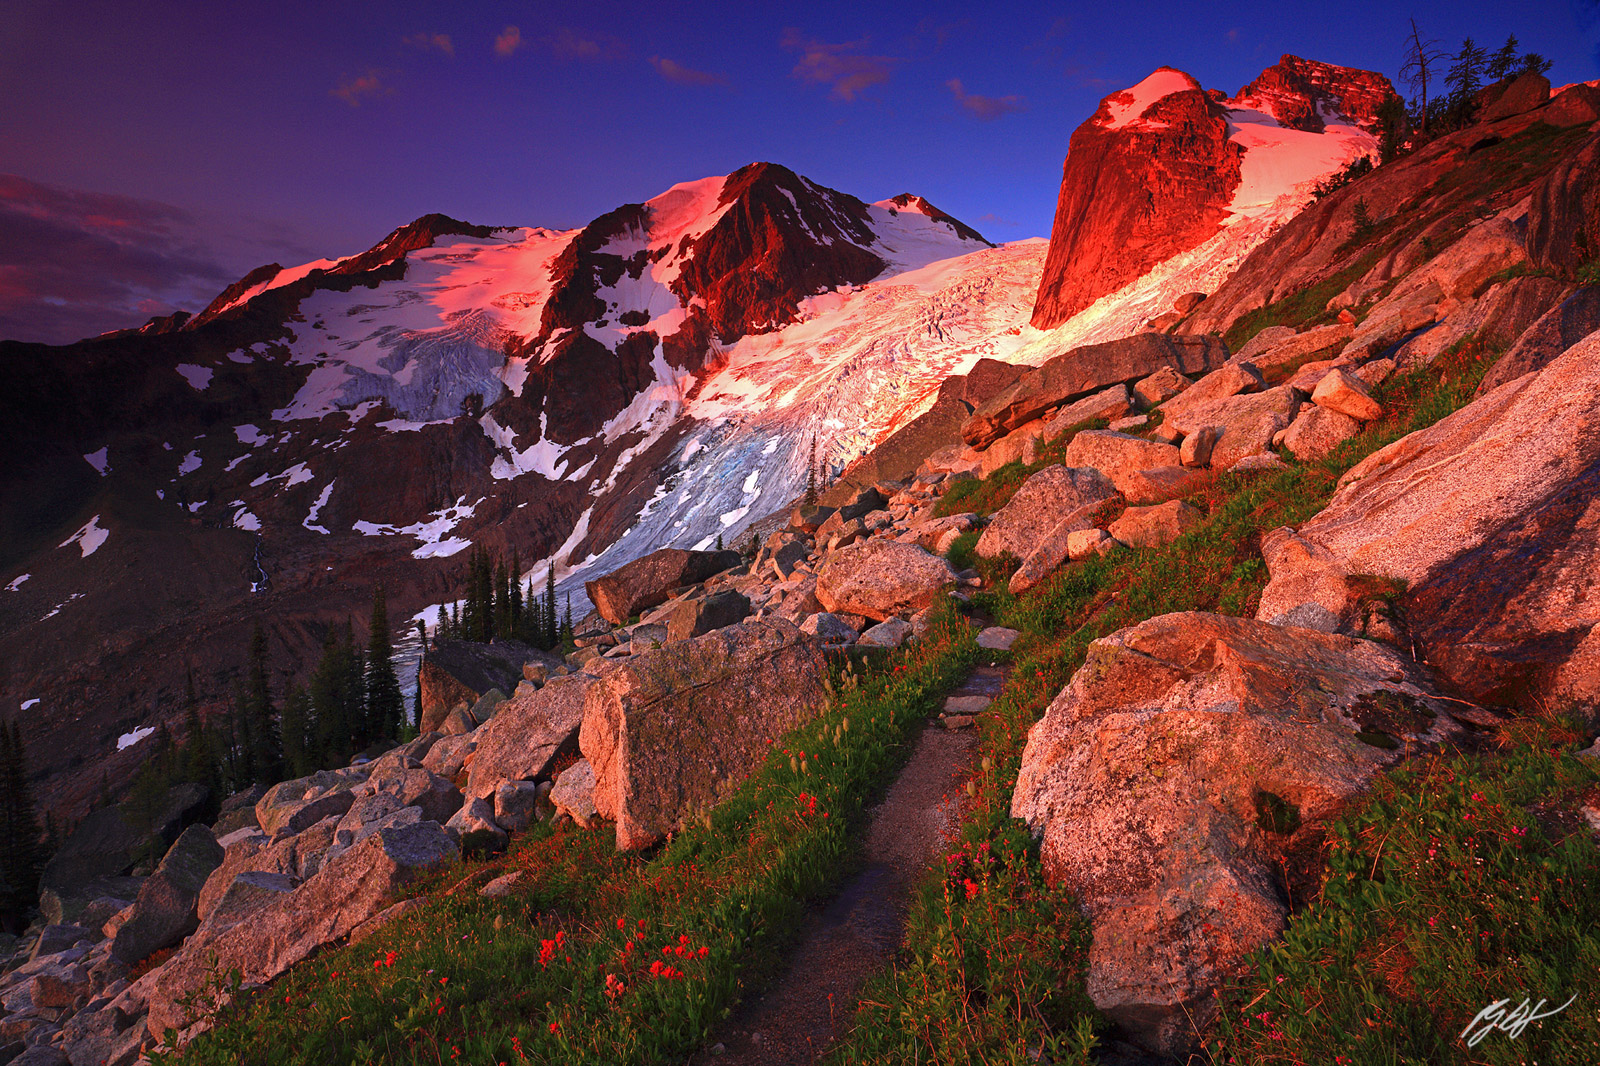 Sunset on the Bugaboo Mountain in Bugaboo Provincial Park in Canada